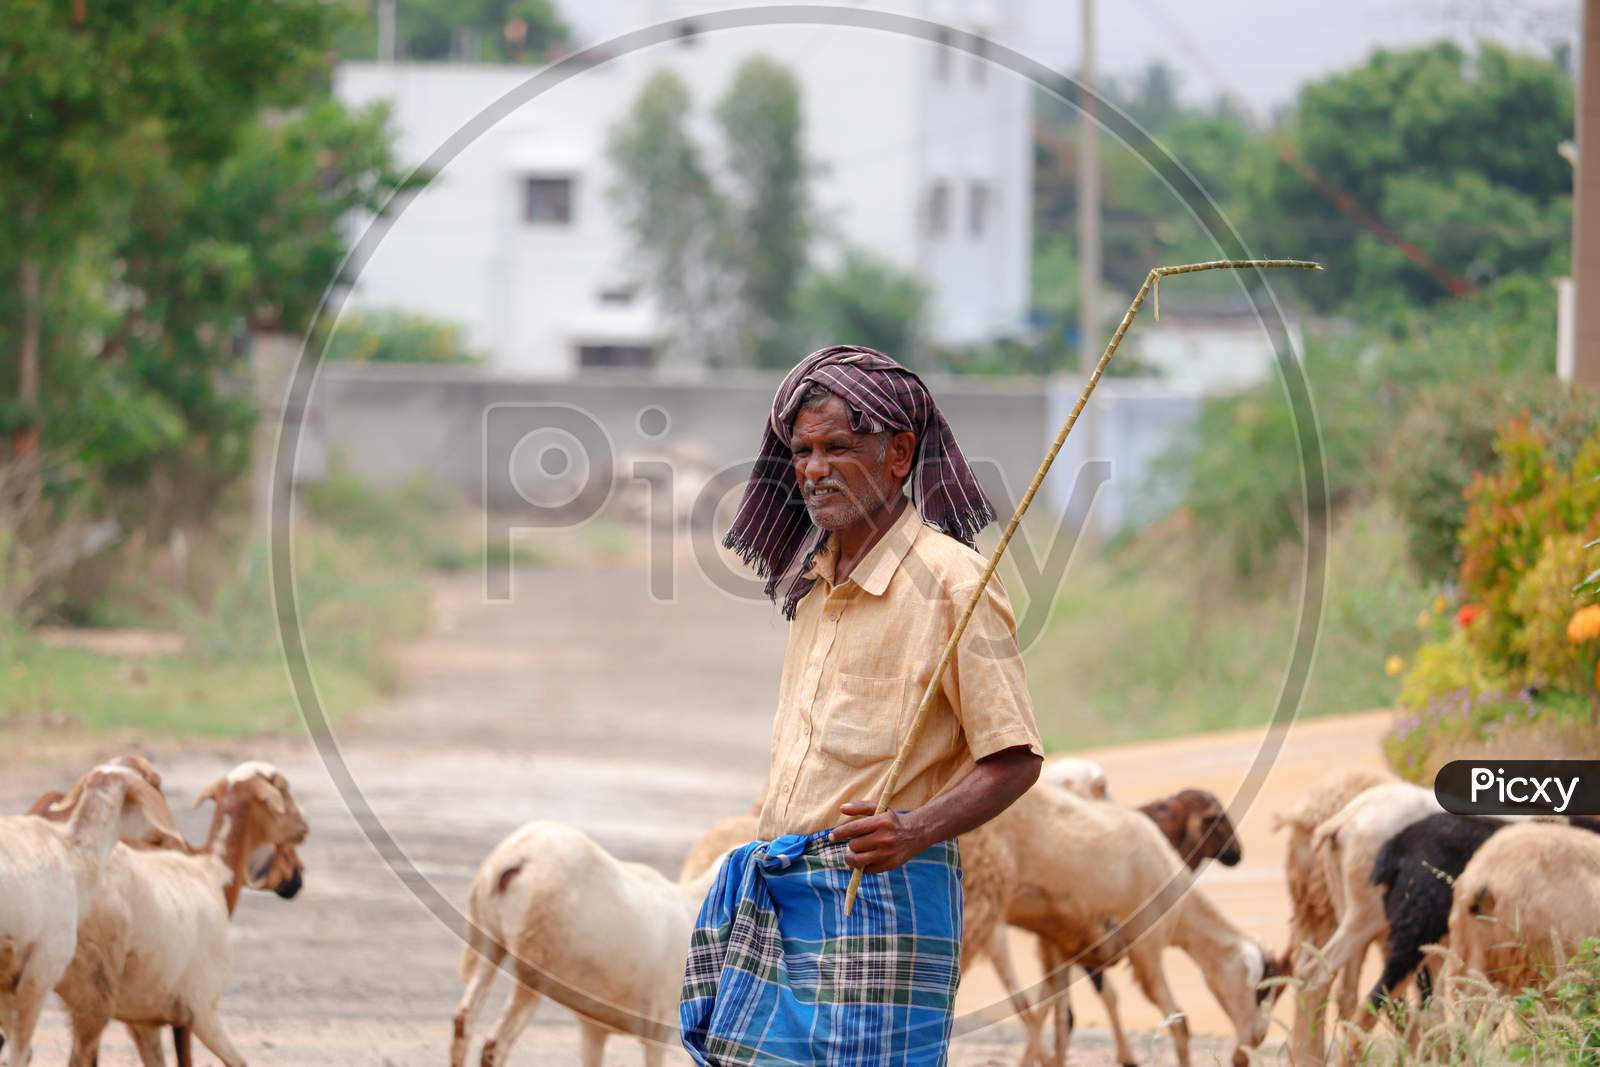 Coimbatore, Tamilnadu / India - 06/25/2020: Indian Shepherd farmer standing with stick in hand with a herd of goats for grazing